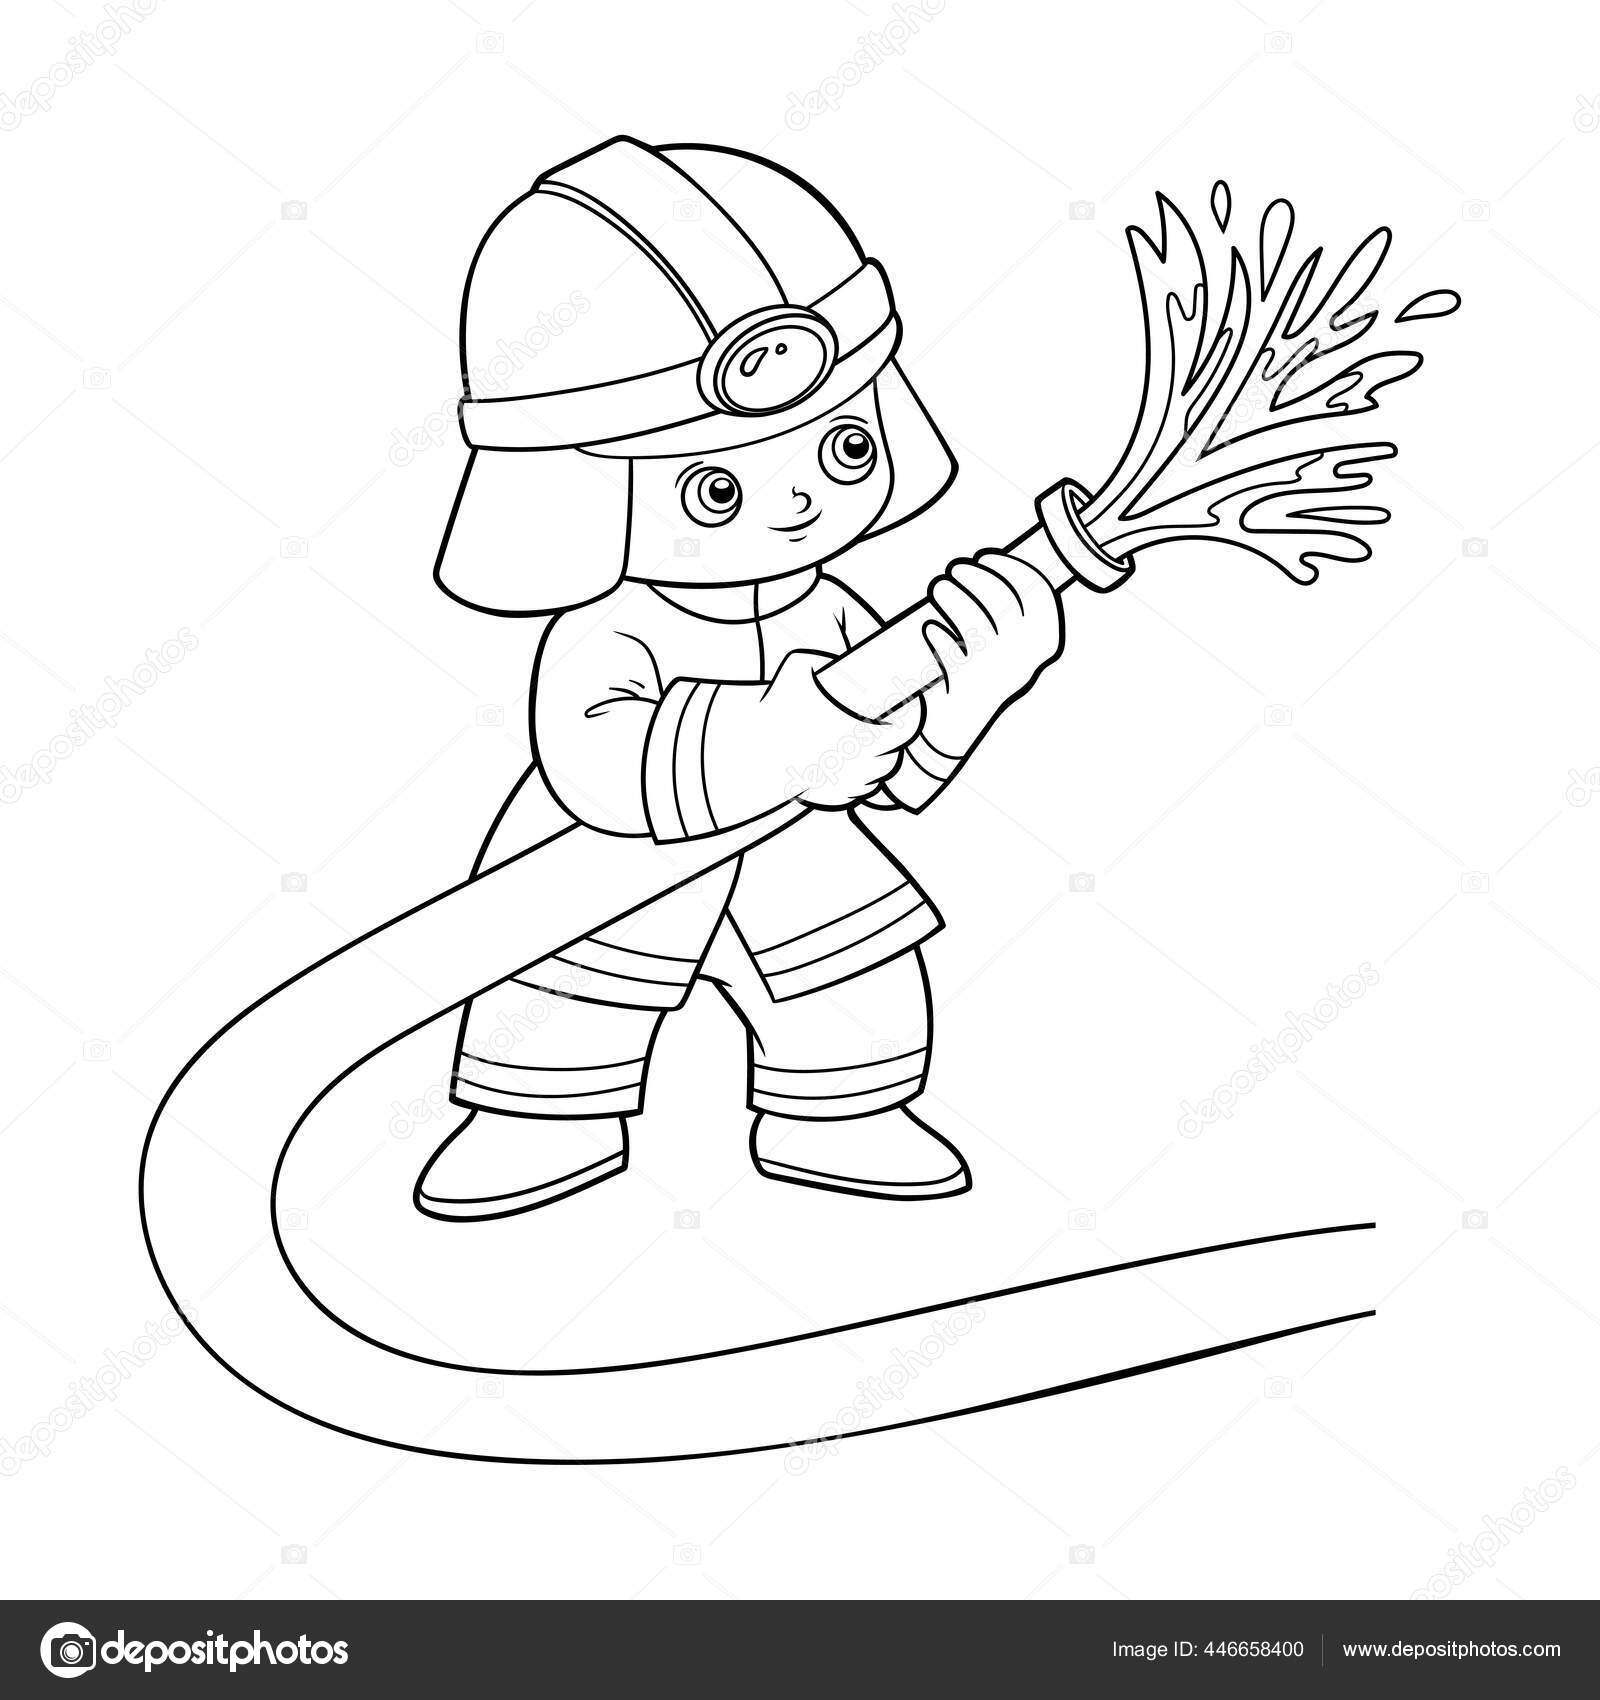 firefighter coloring pages